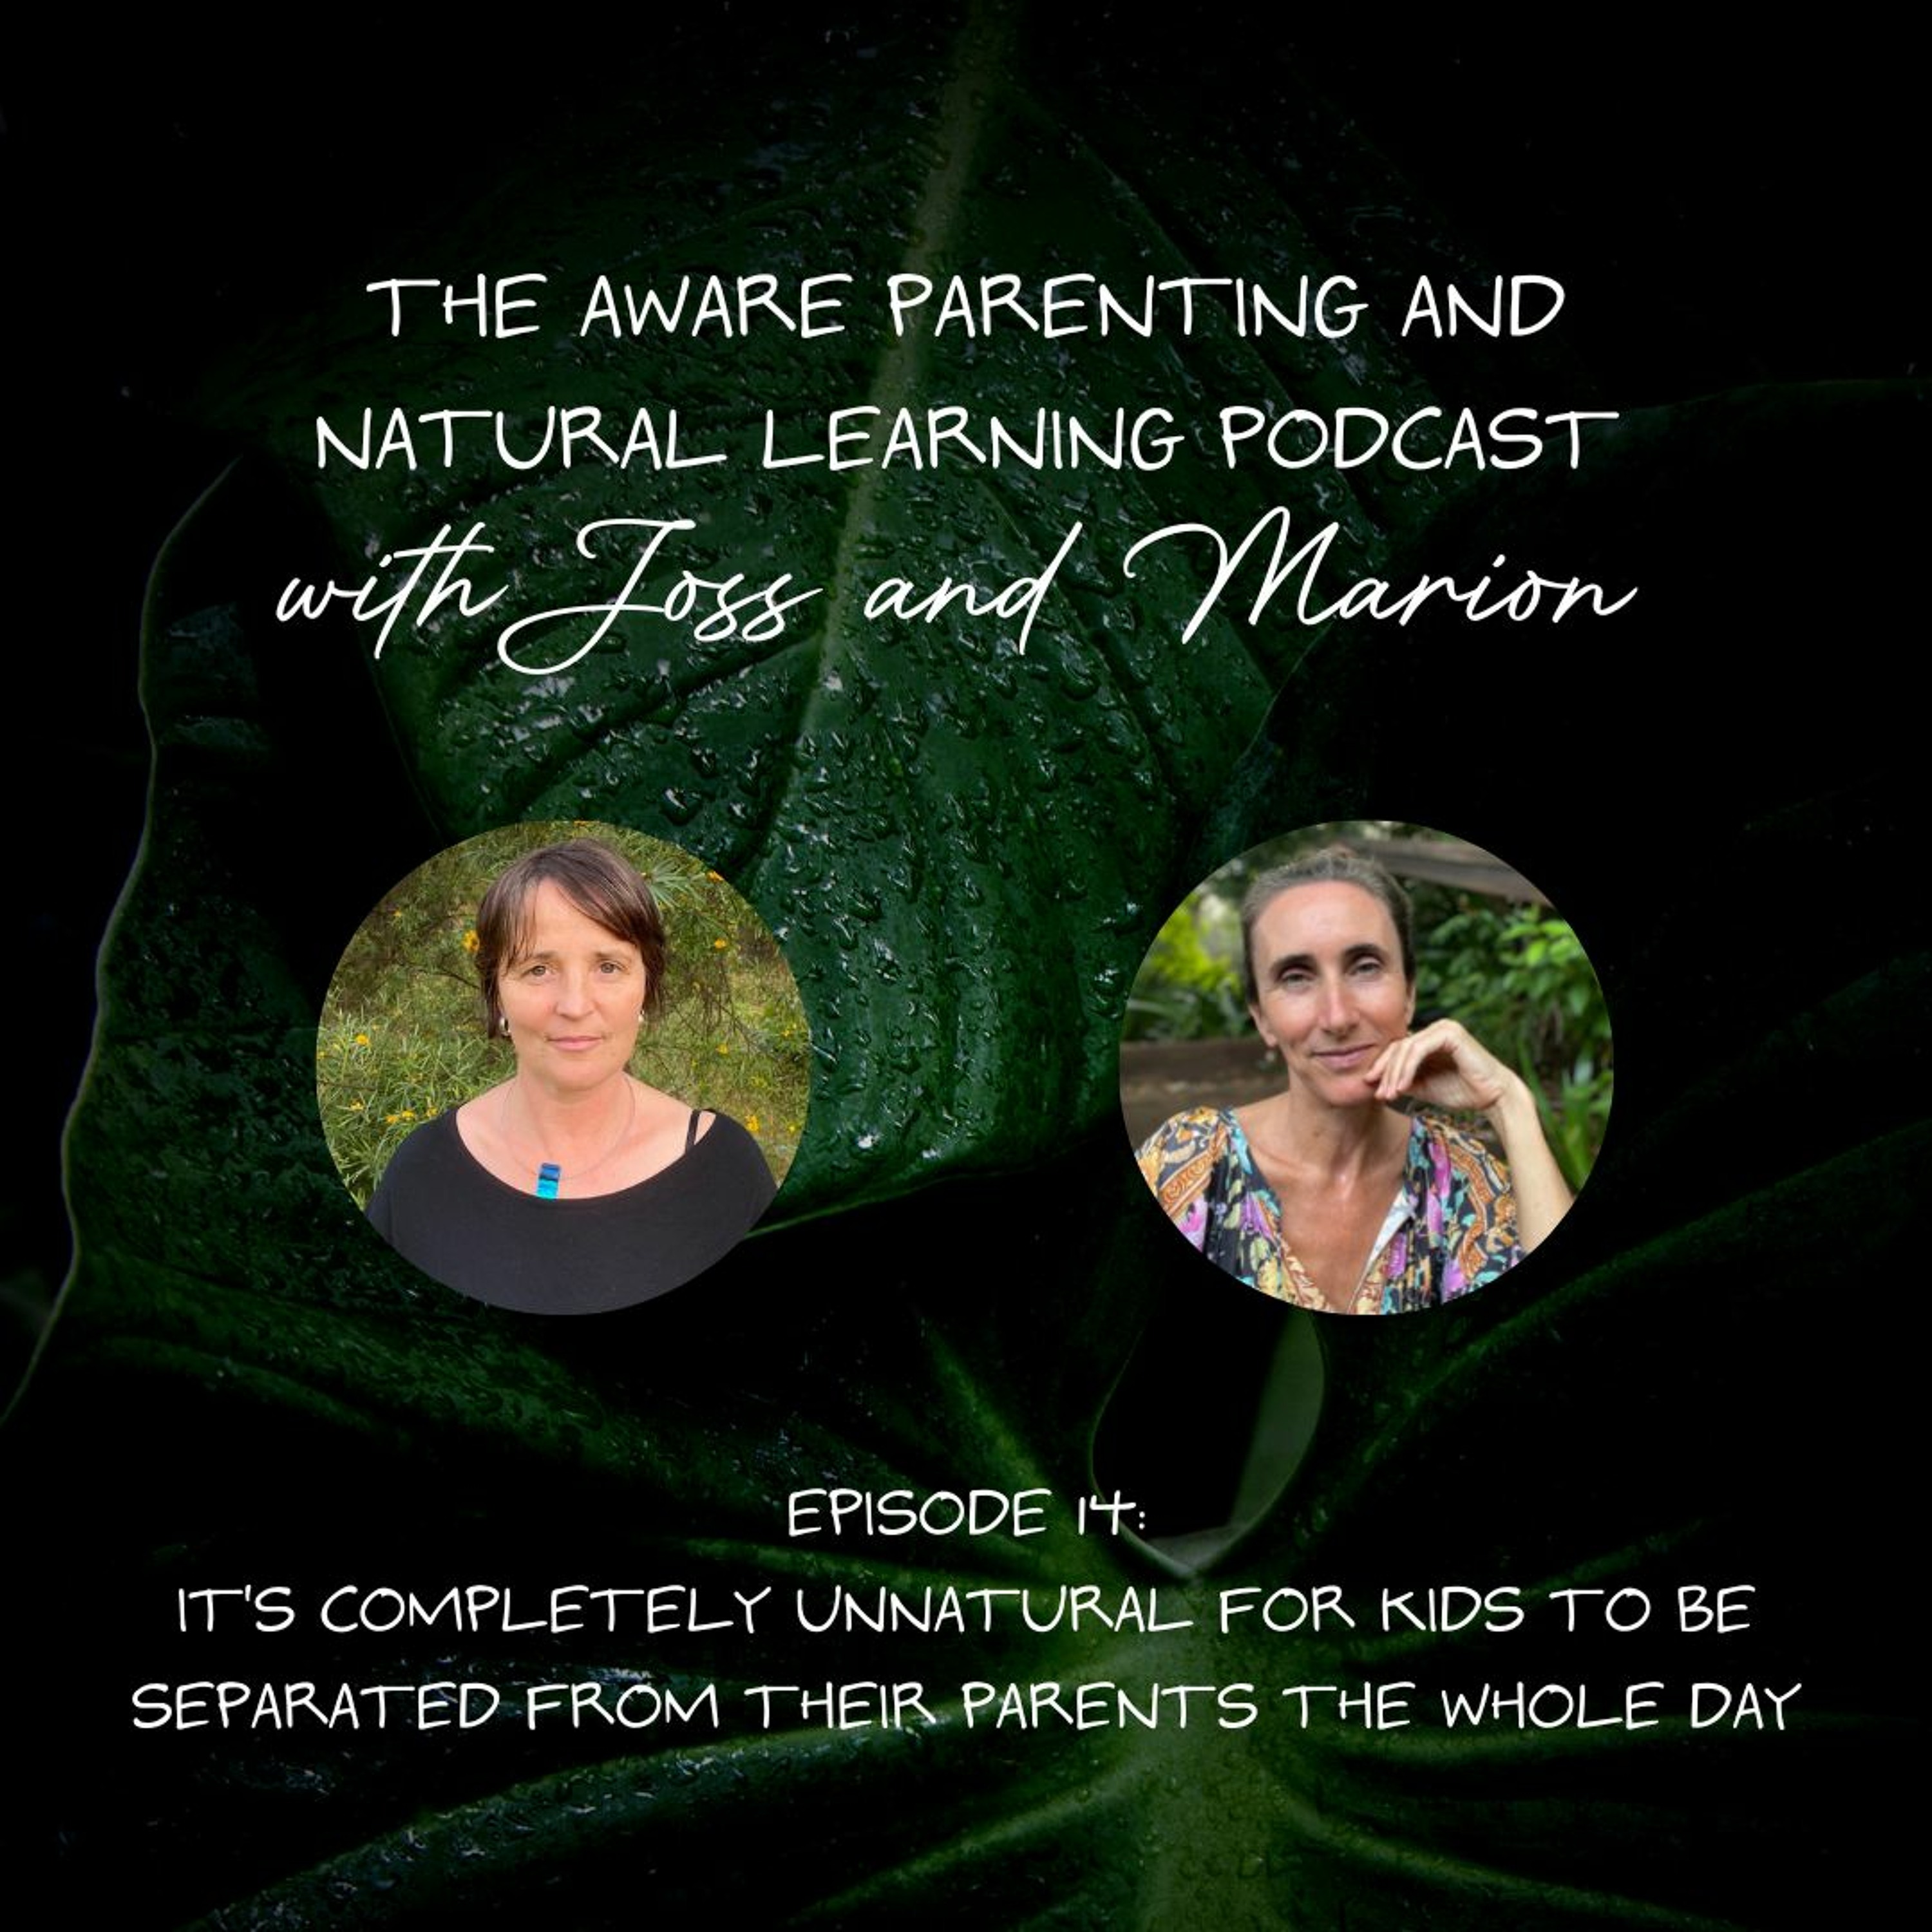 Episode 14: It's completely unnatural for kids to be separated from their parents the whole day